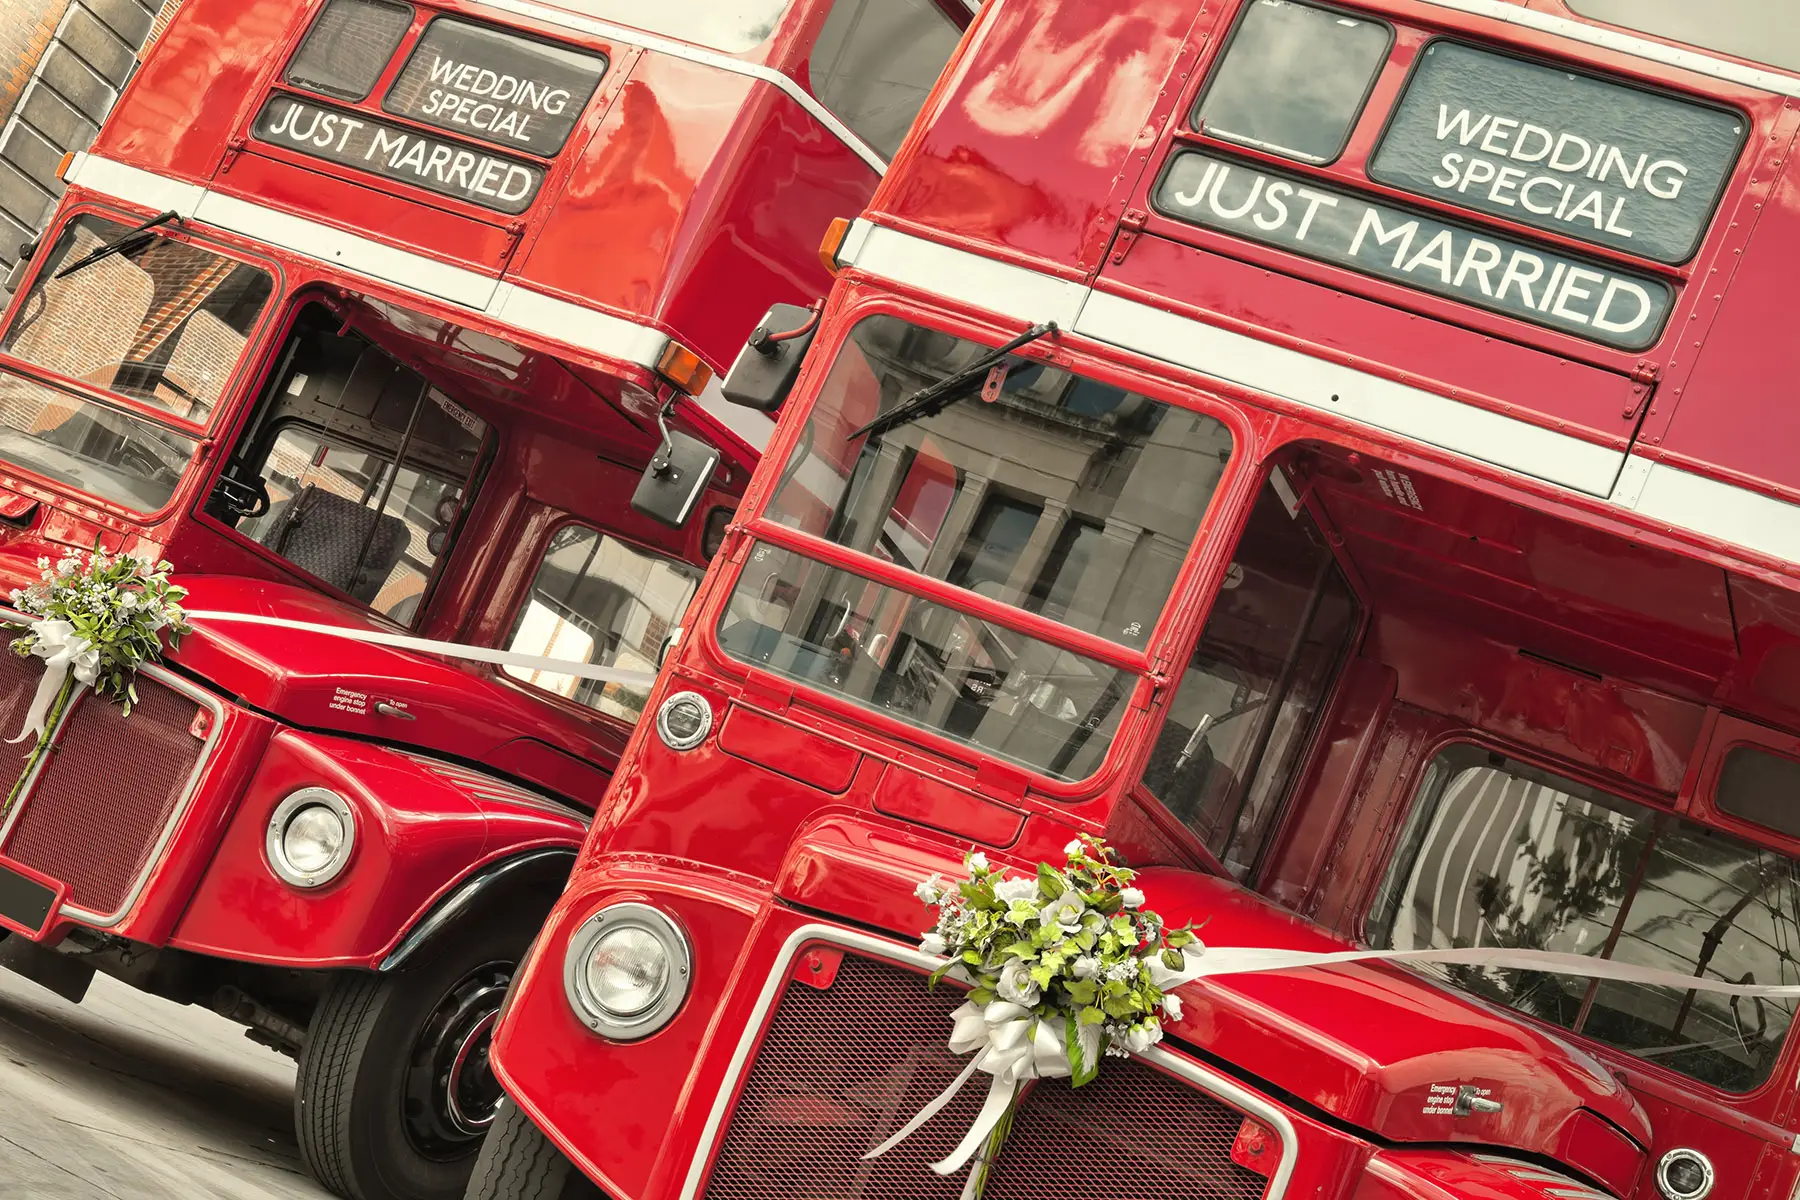 Double decker bus with just married signs